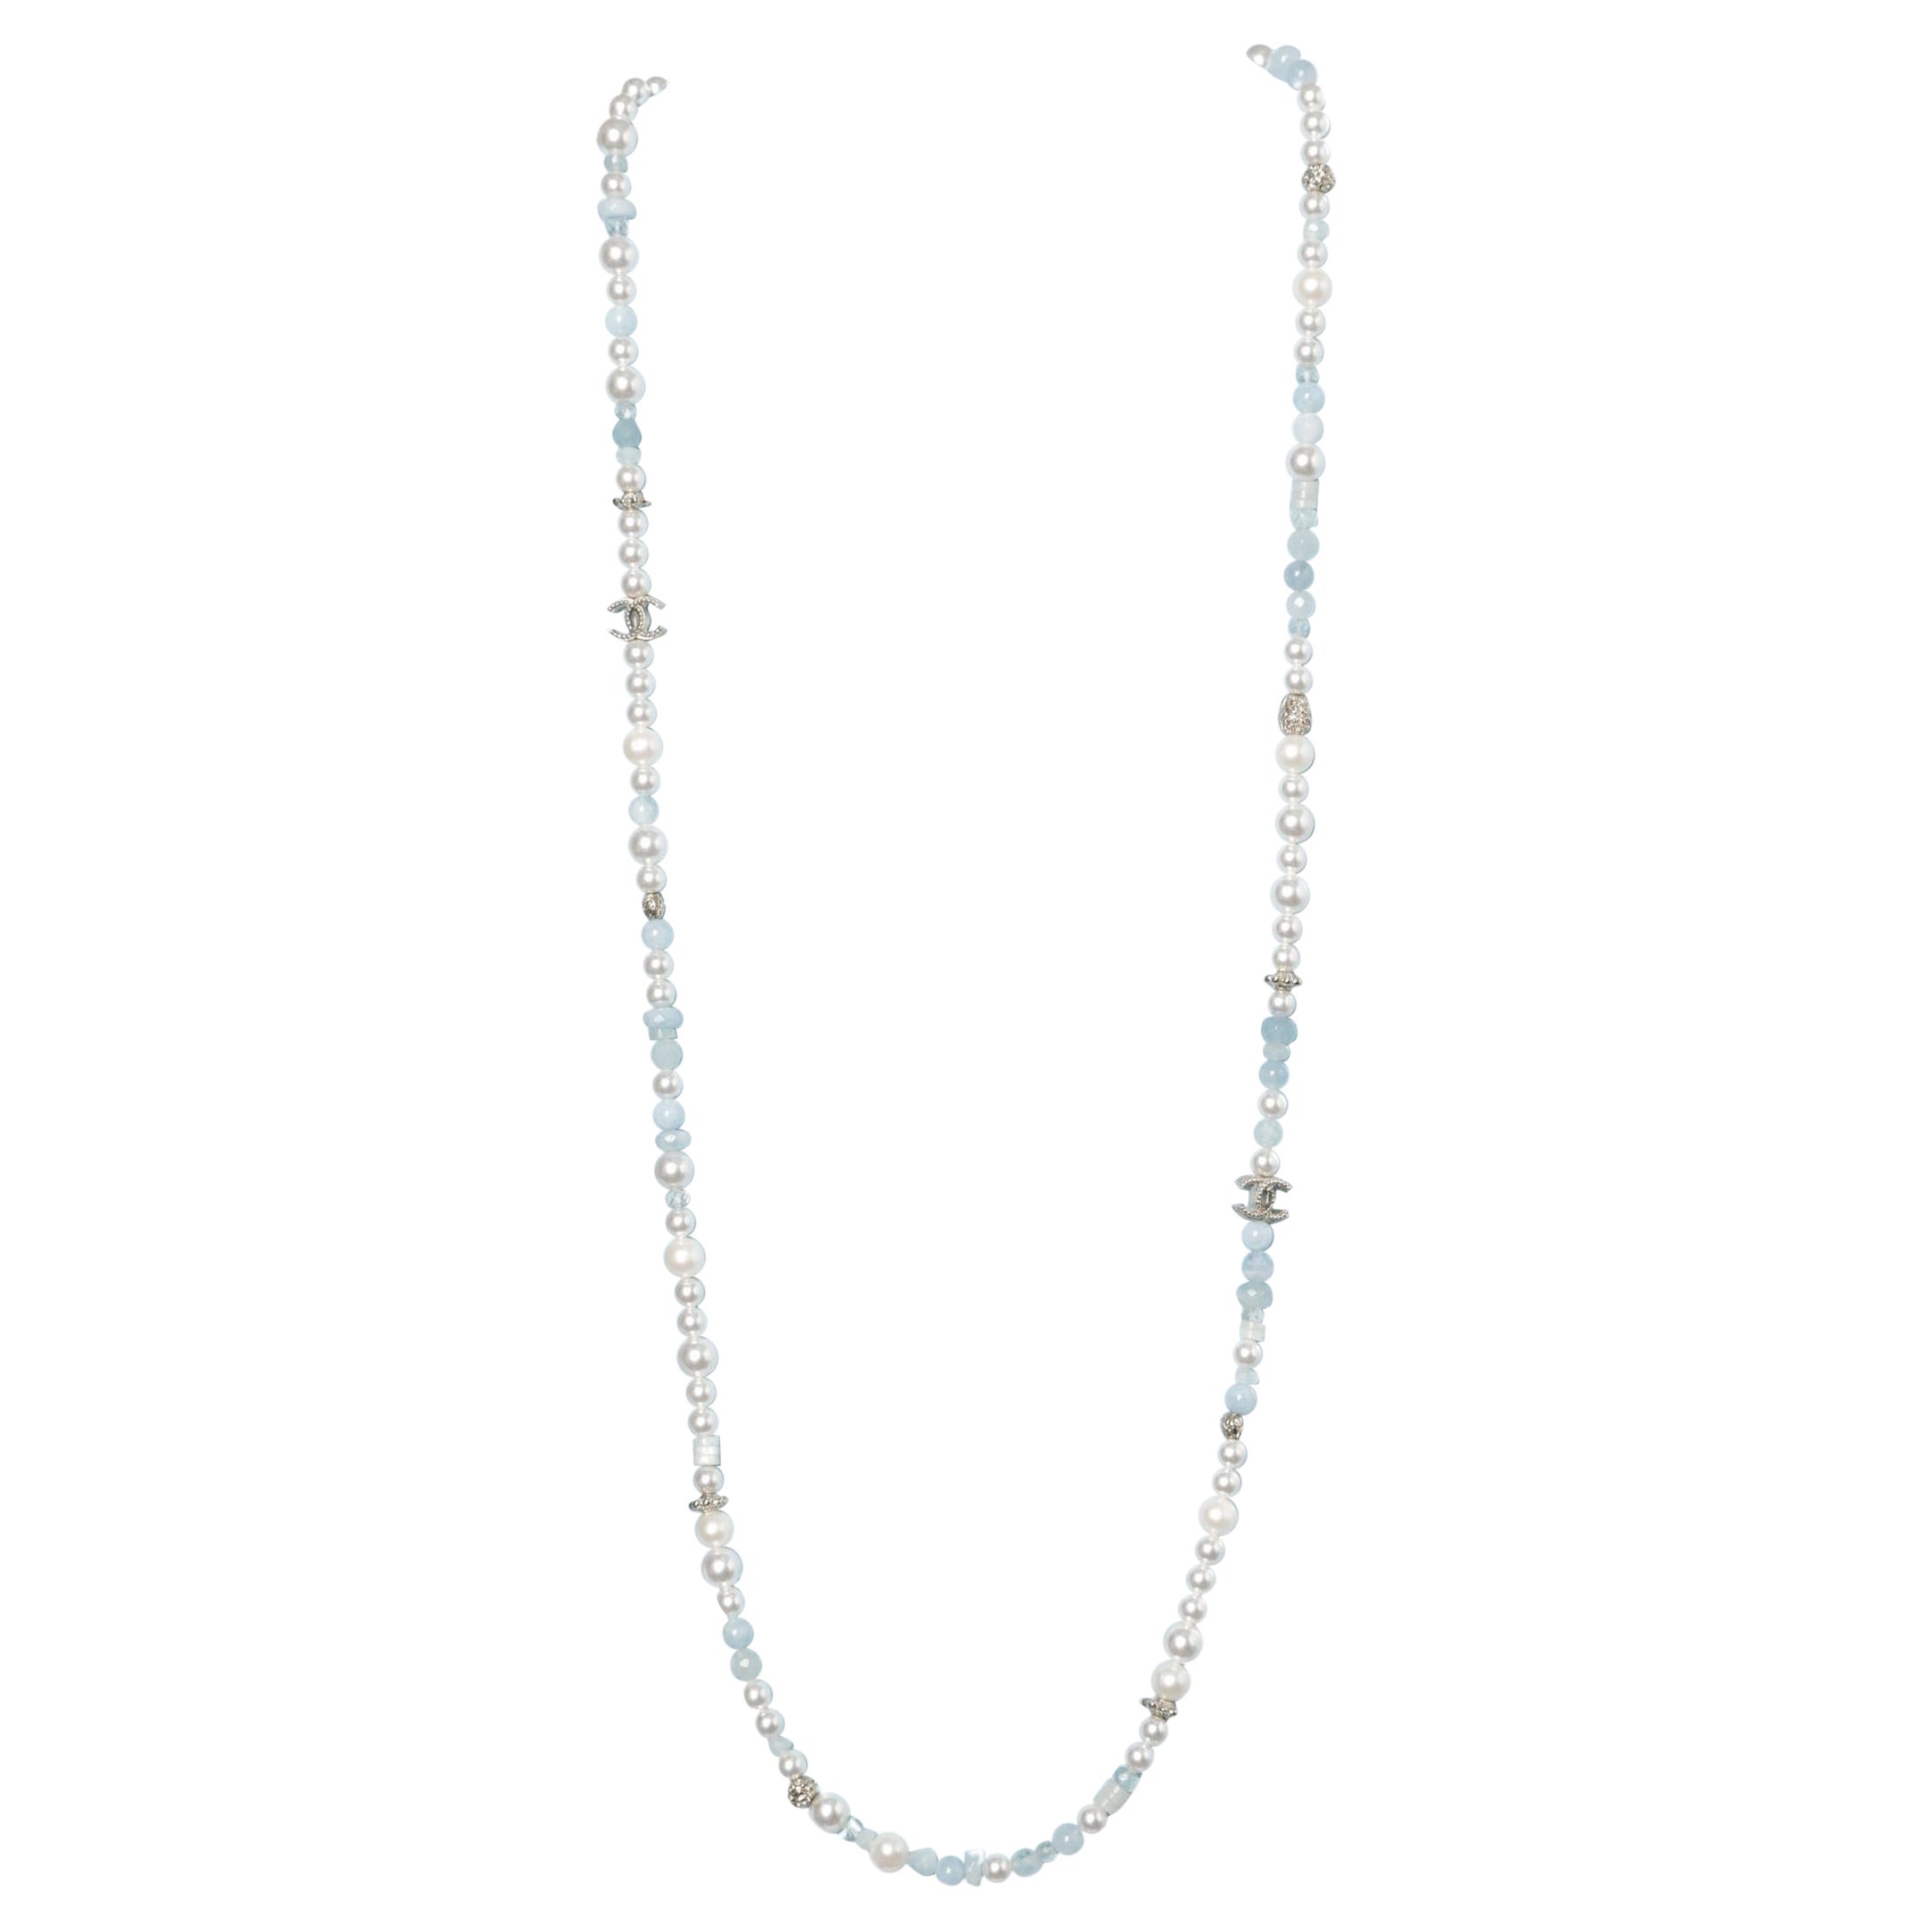 Beaded long neckless with pearls and silver beads "CC" Chanel 